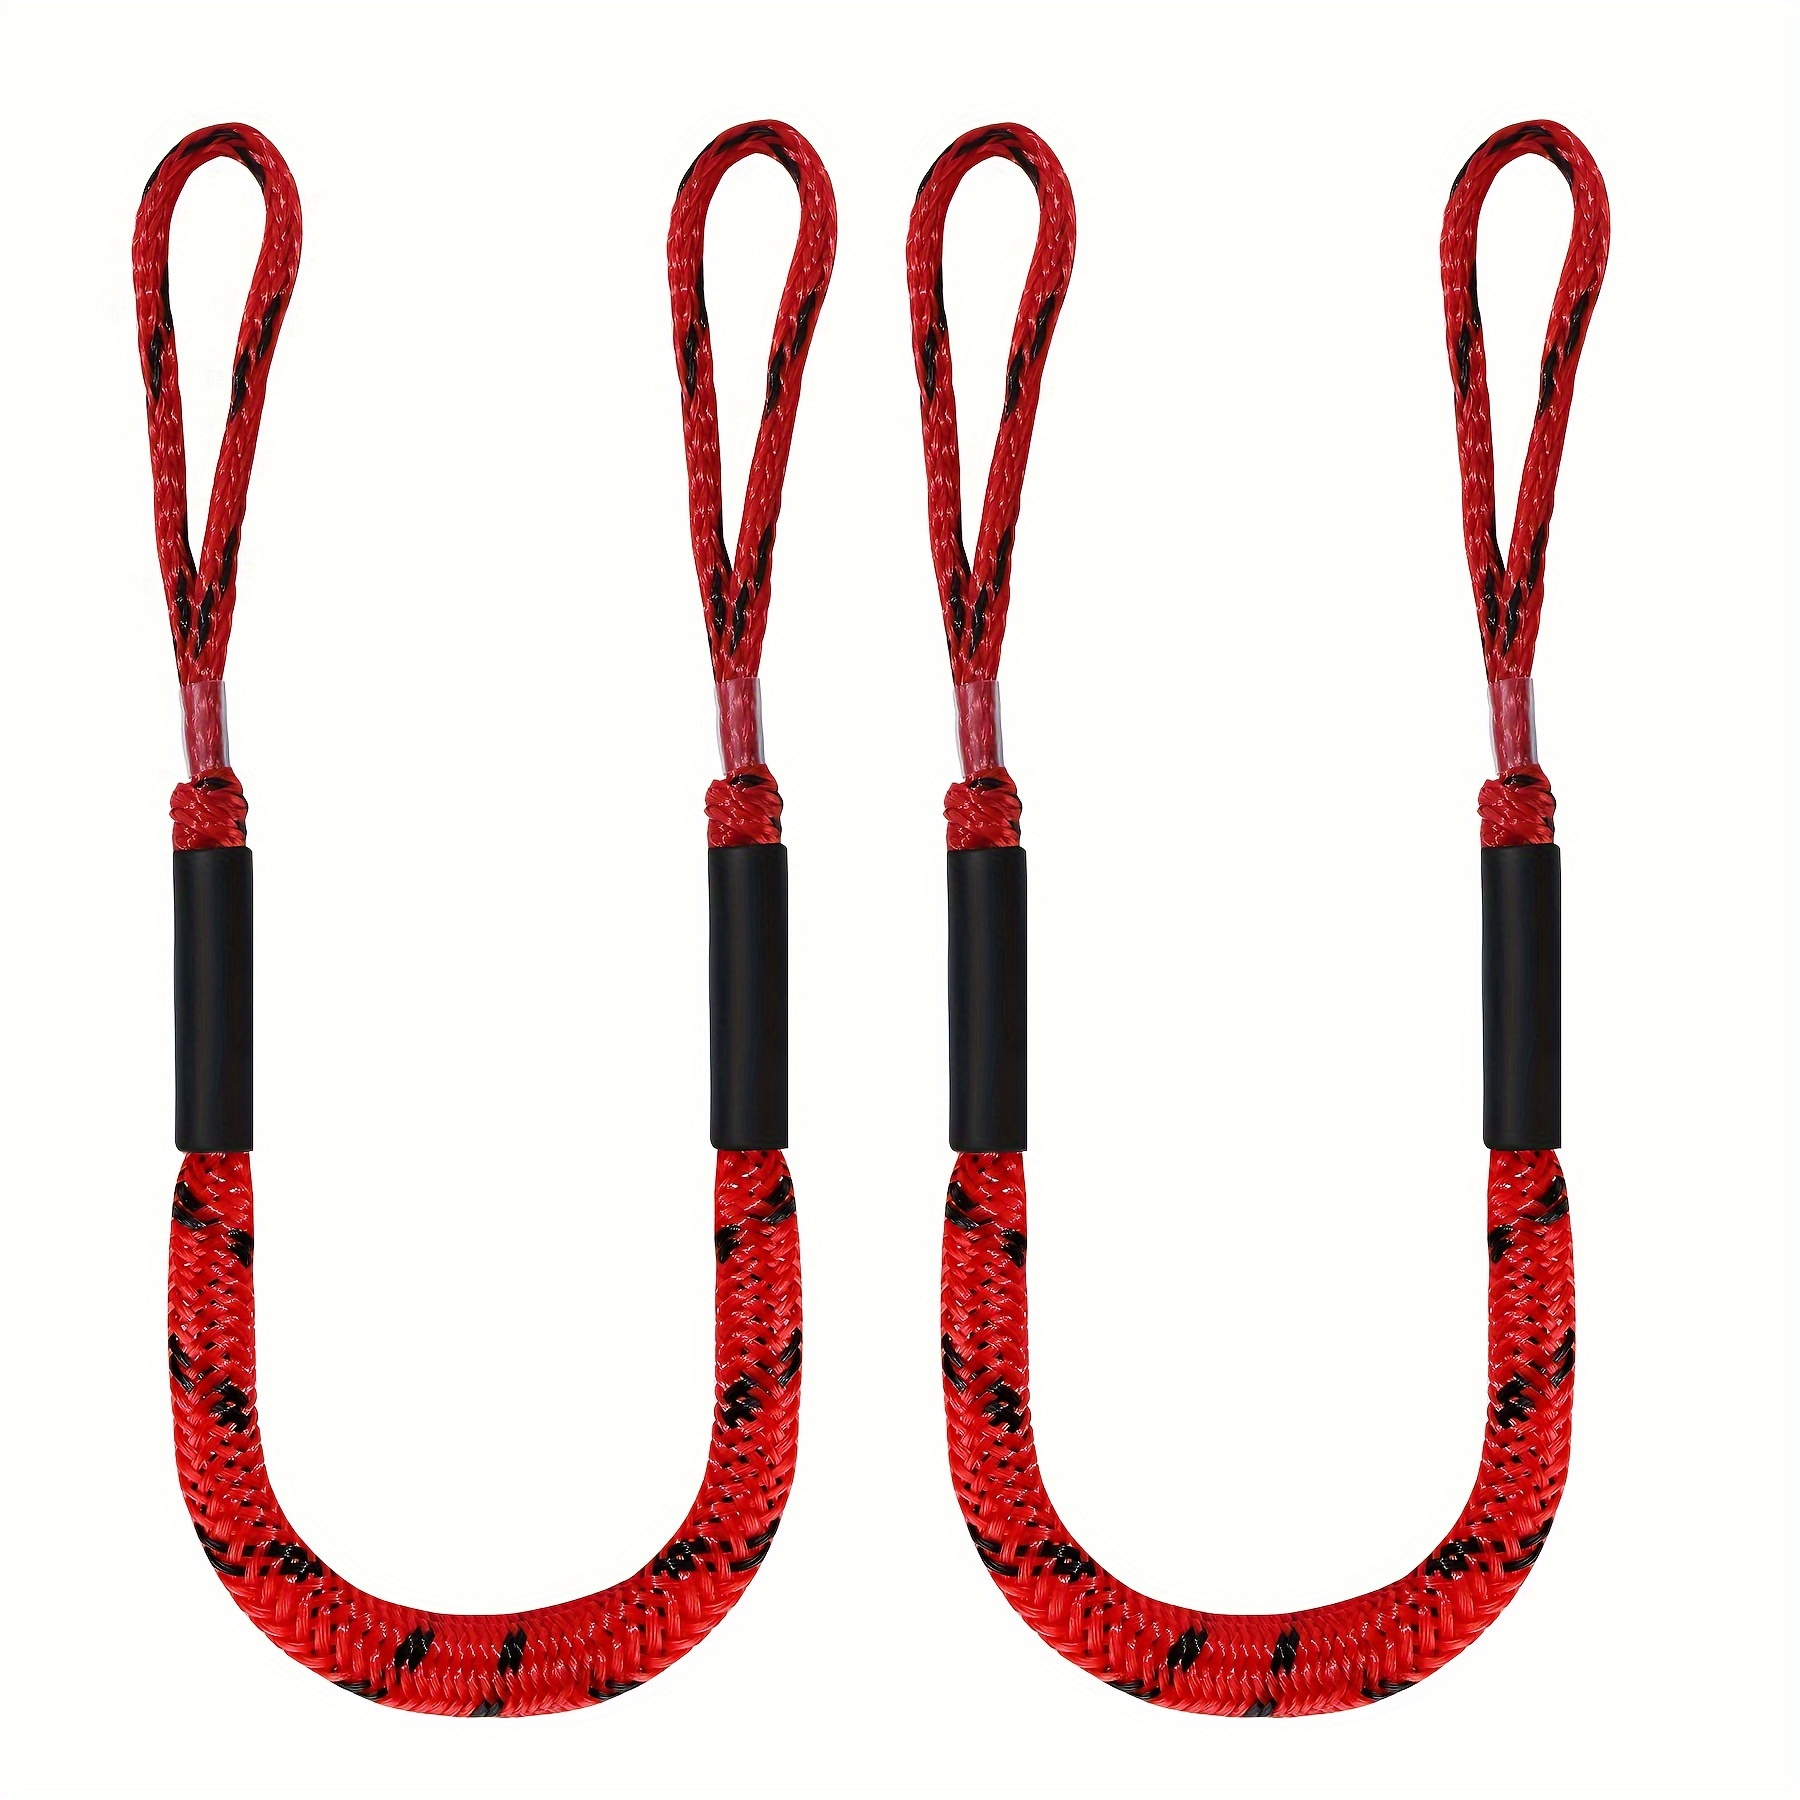 4pcs Bungee Dock Lines Mooring Ropes Of 4-5.5ft Boating Gifts For